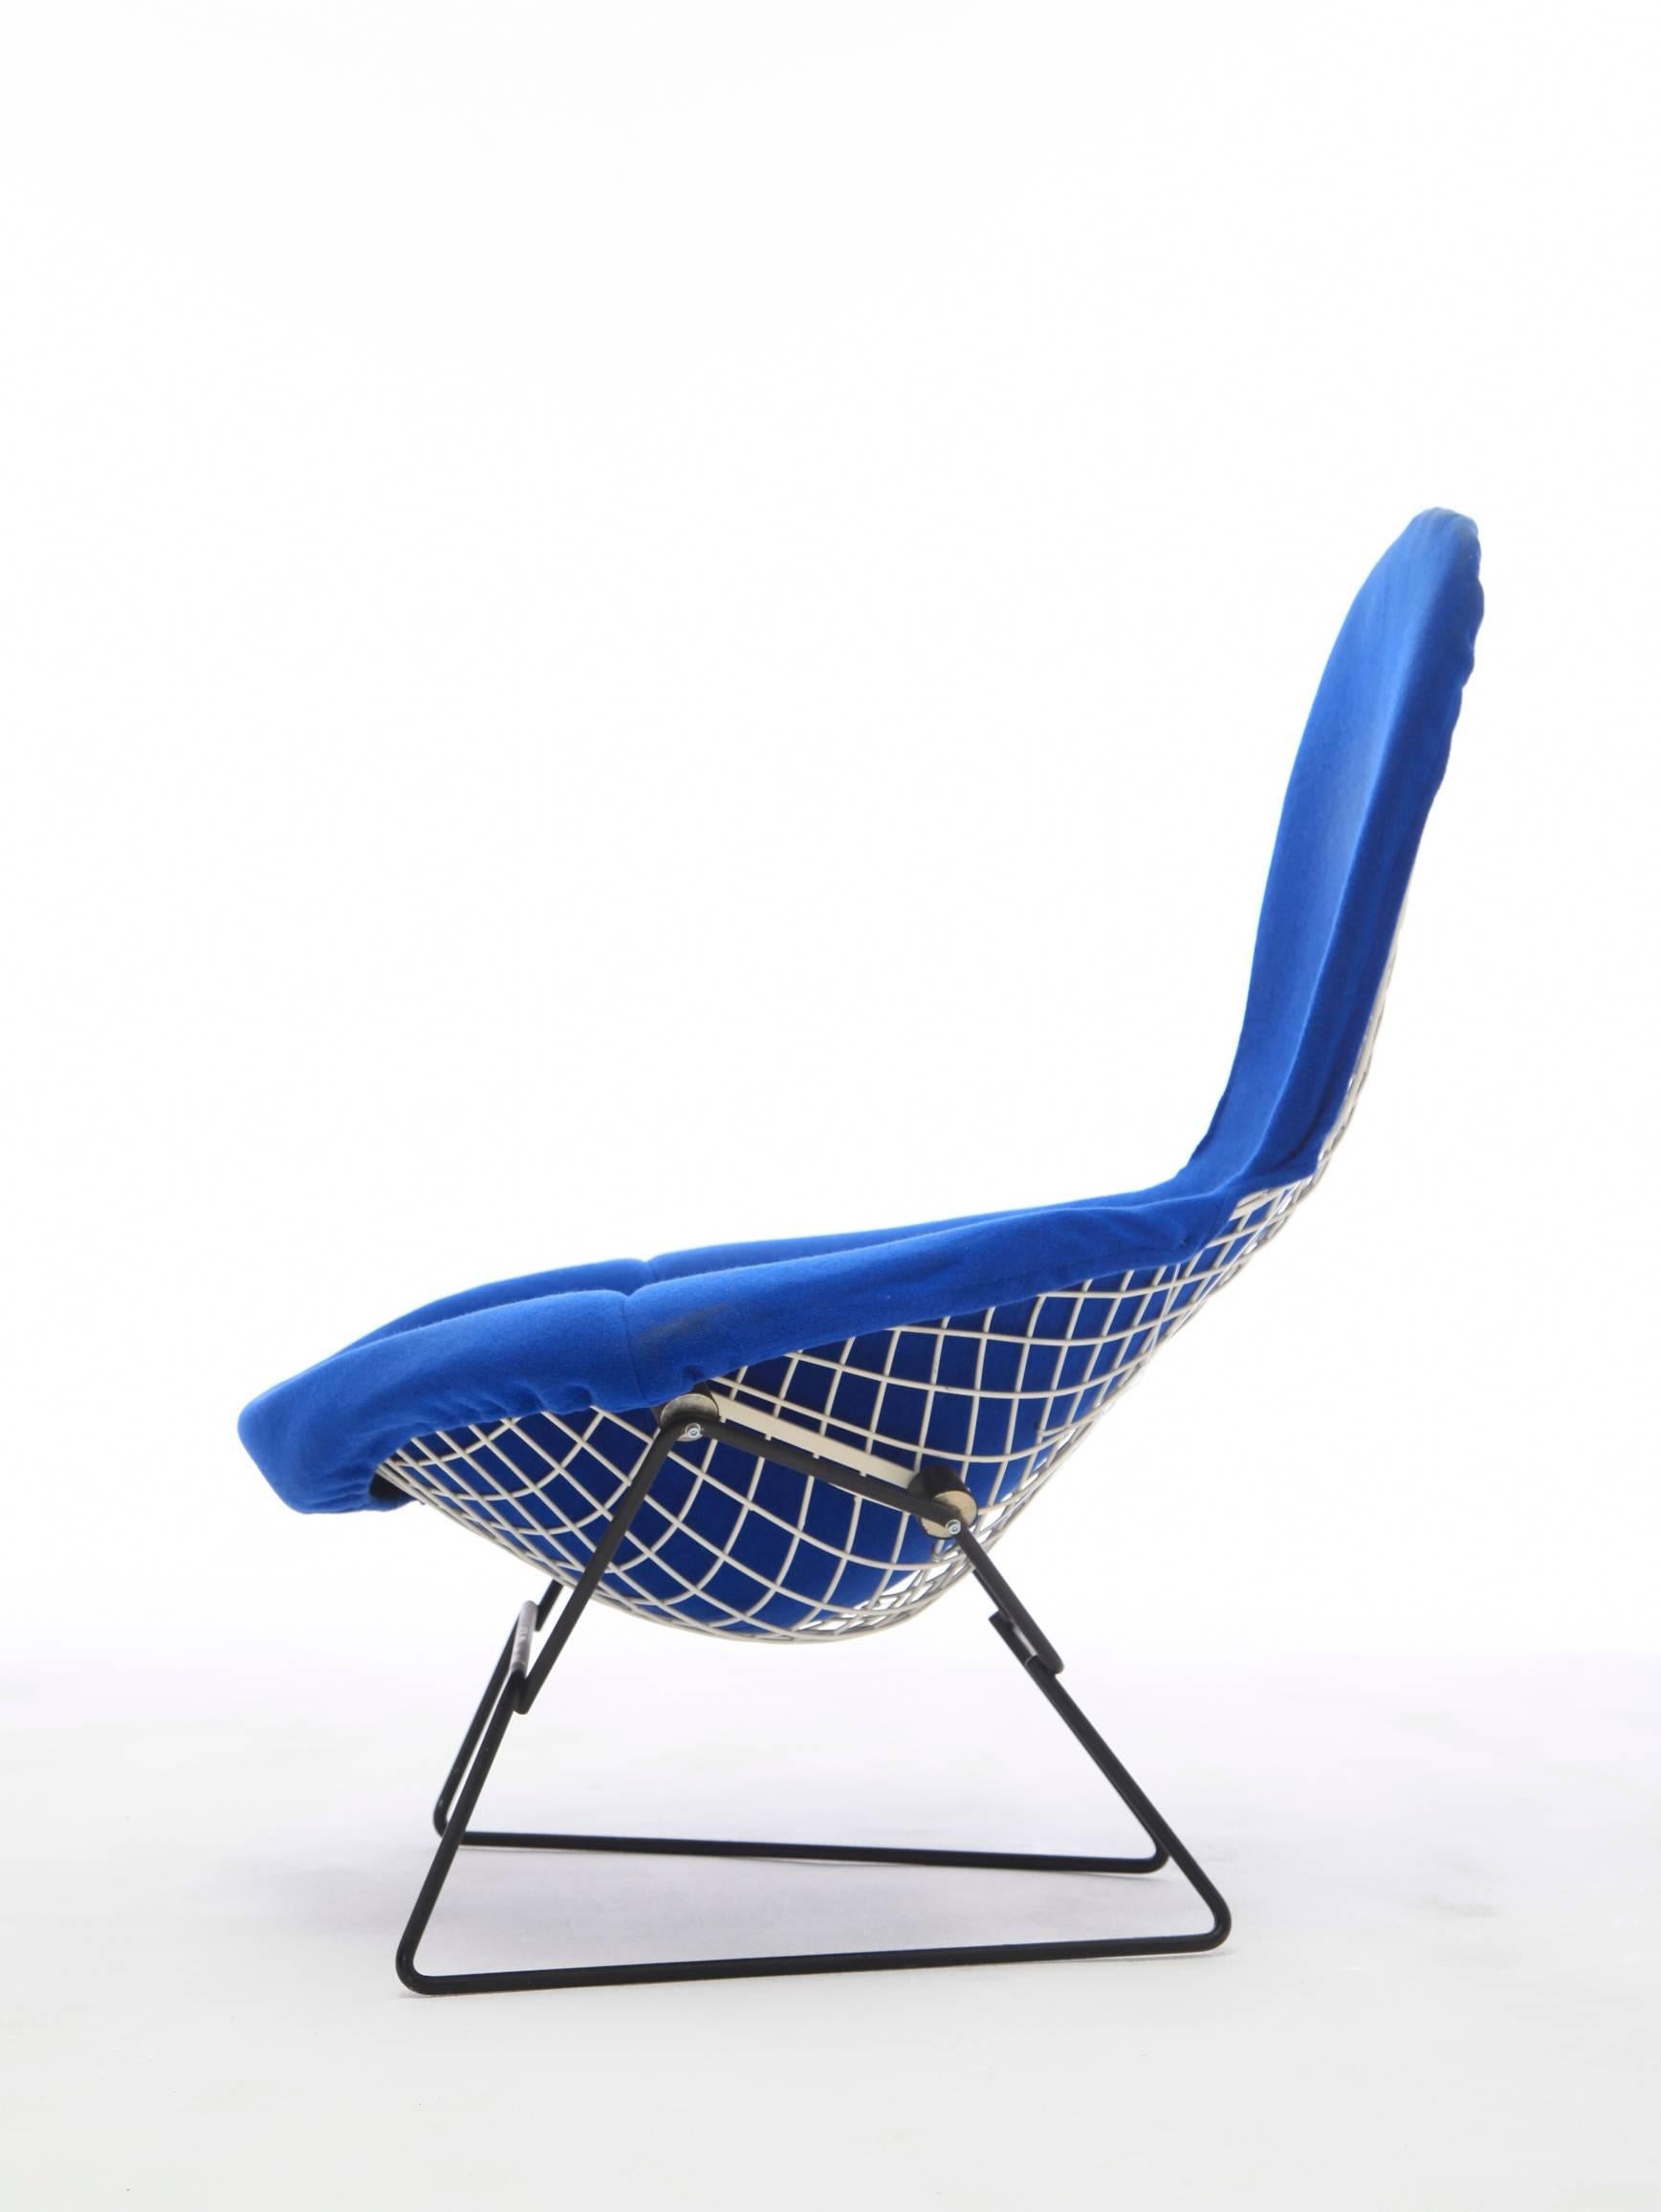 Harry Bertoia bird chair and footstool, for Knoll International, made from lacquered steel rods. Rare black and white model. Chair and ottoman in electric blue upholstery. Good structural condition. Some minor enamel loss on chair.